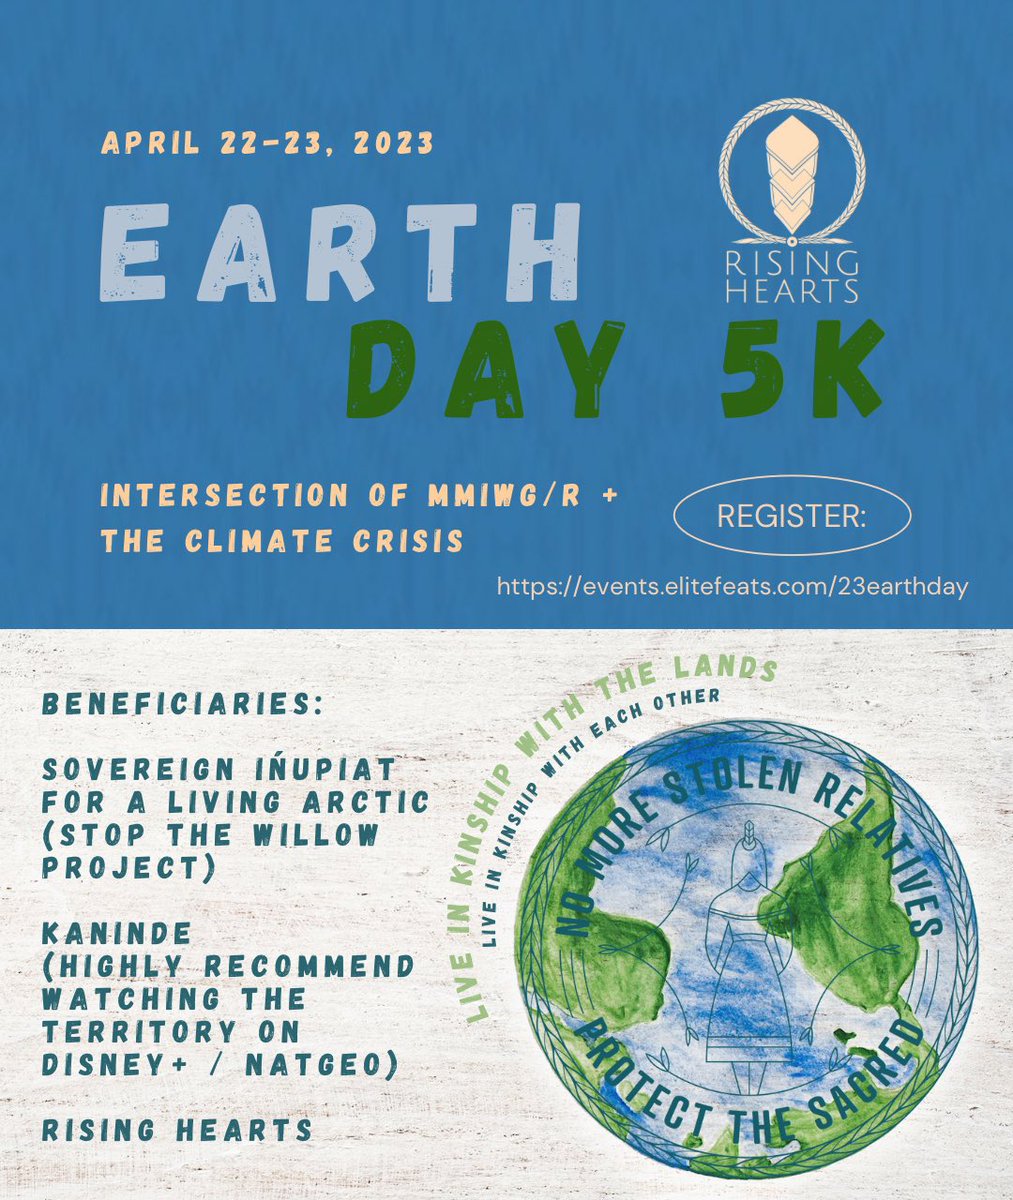 Excited to organize our first virtual and in person Earth Day 5k next month! When we talk about climate Justice, we have to include the intersection of violence that fossil fuels brings + the epidemic of #MMIW #MMIR - join an in person run/walk! Register: events.elitefeats.com/23earthday